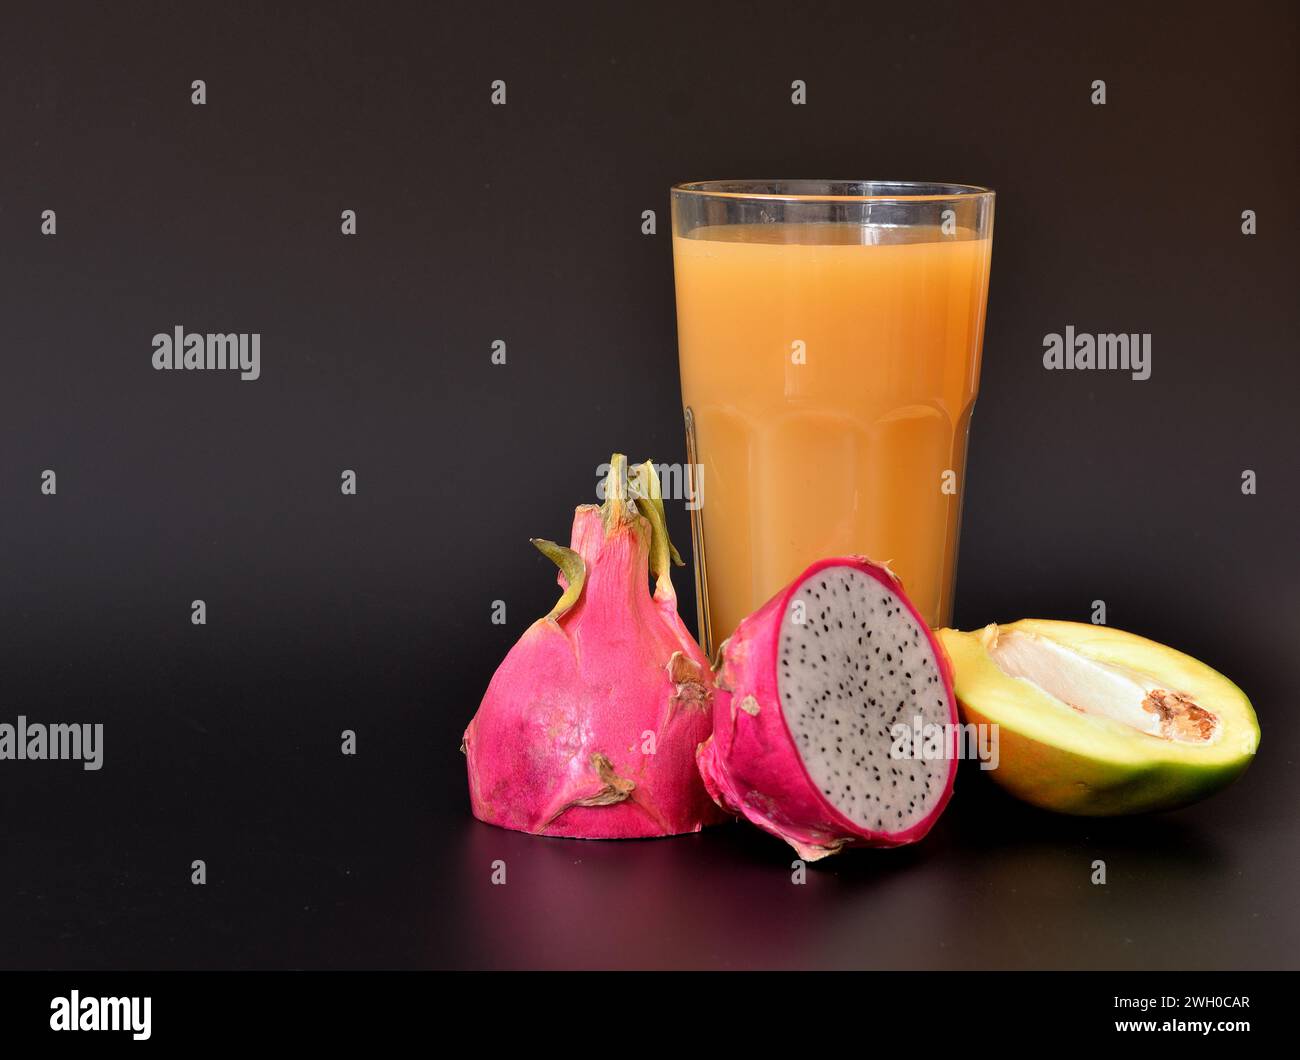 A tall glass of mango juice with pitaya and pieces of ripe fruit on a black background. Close-up. Stock Photo